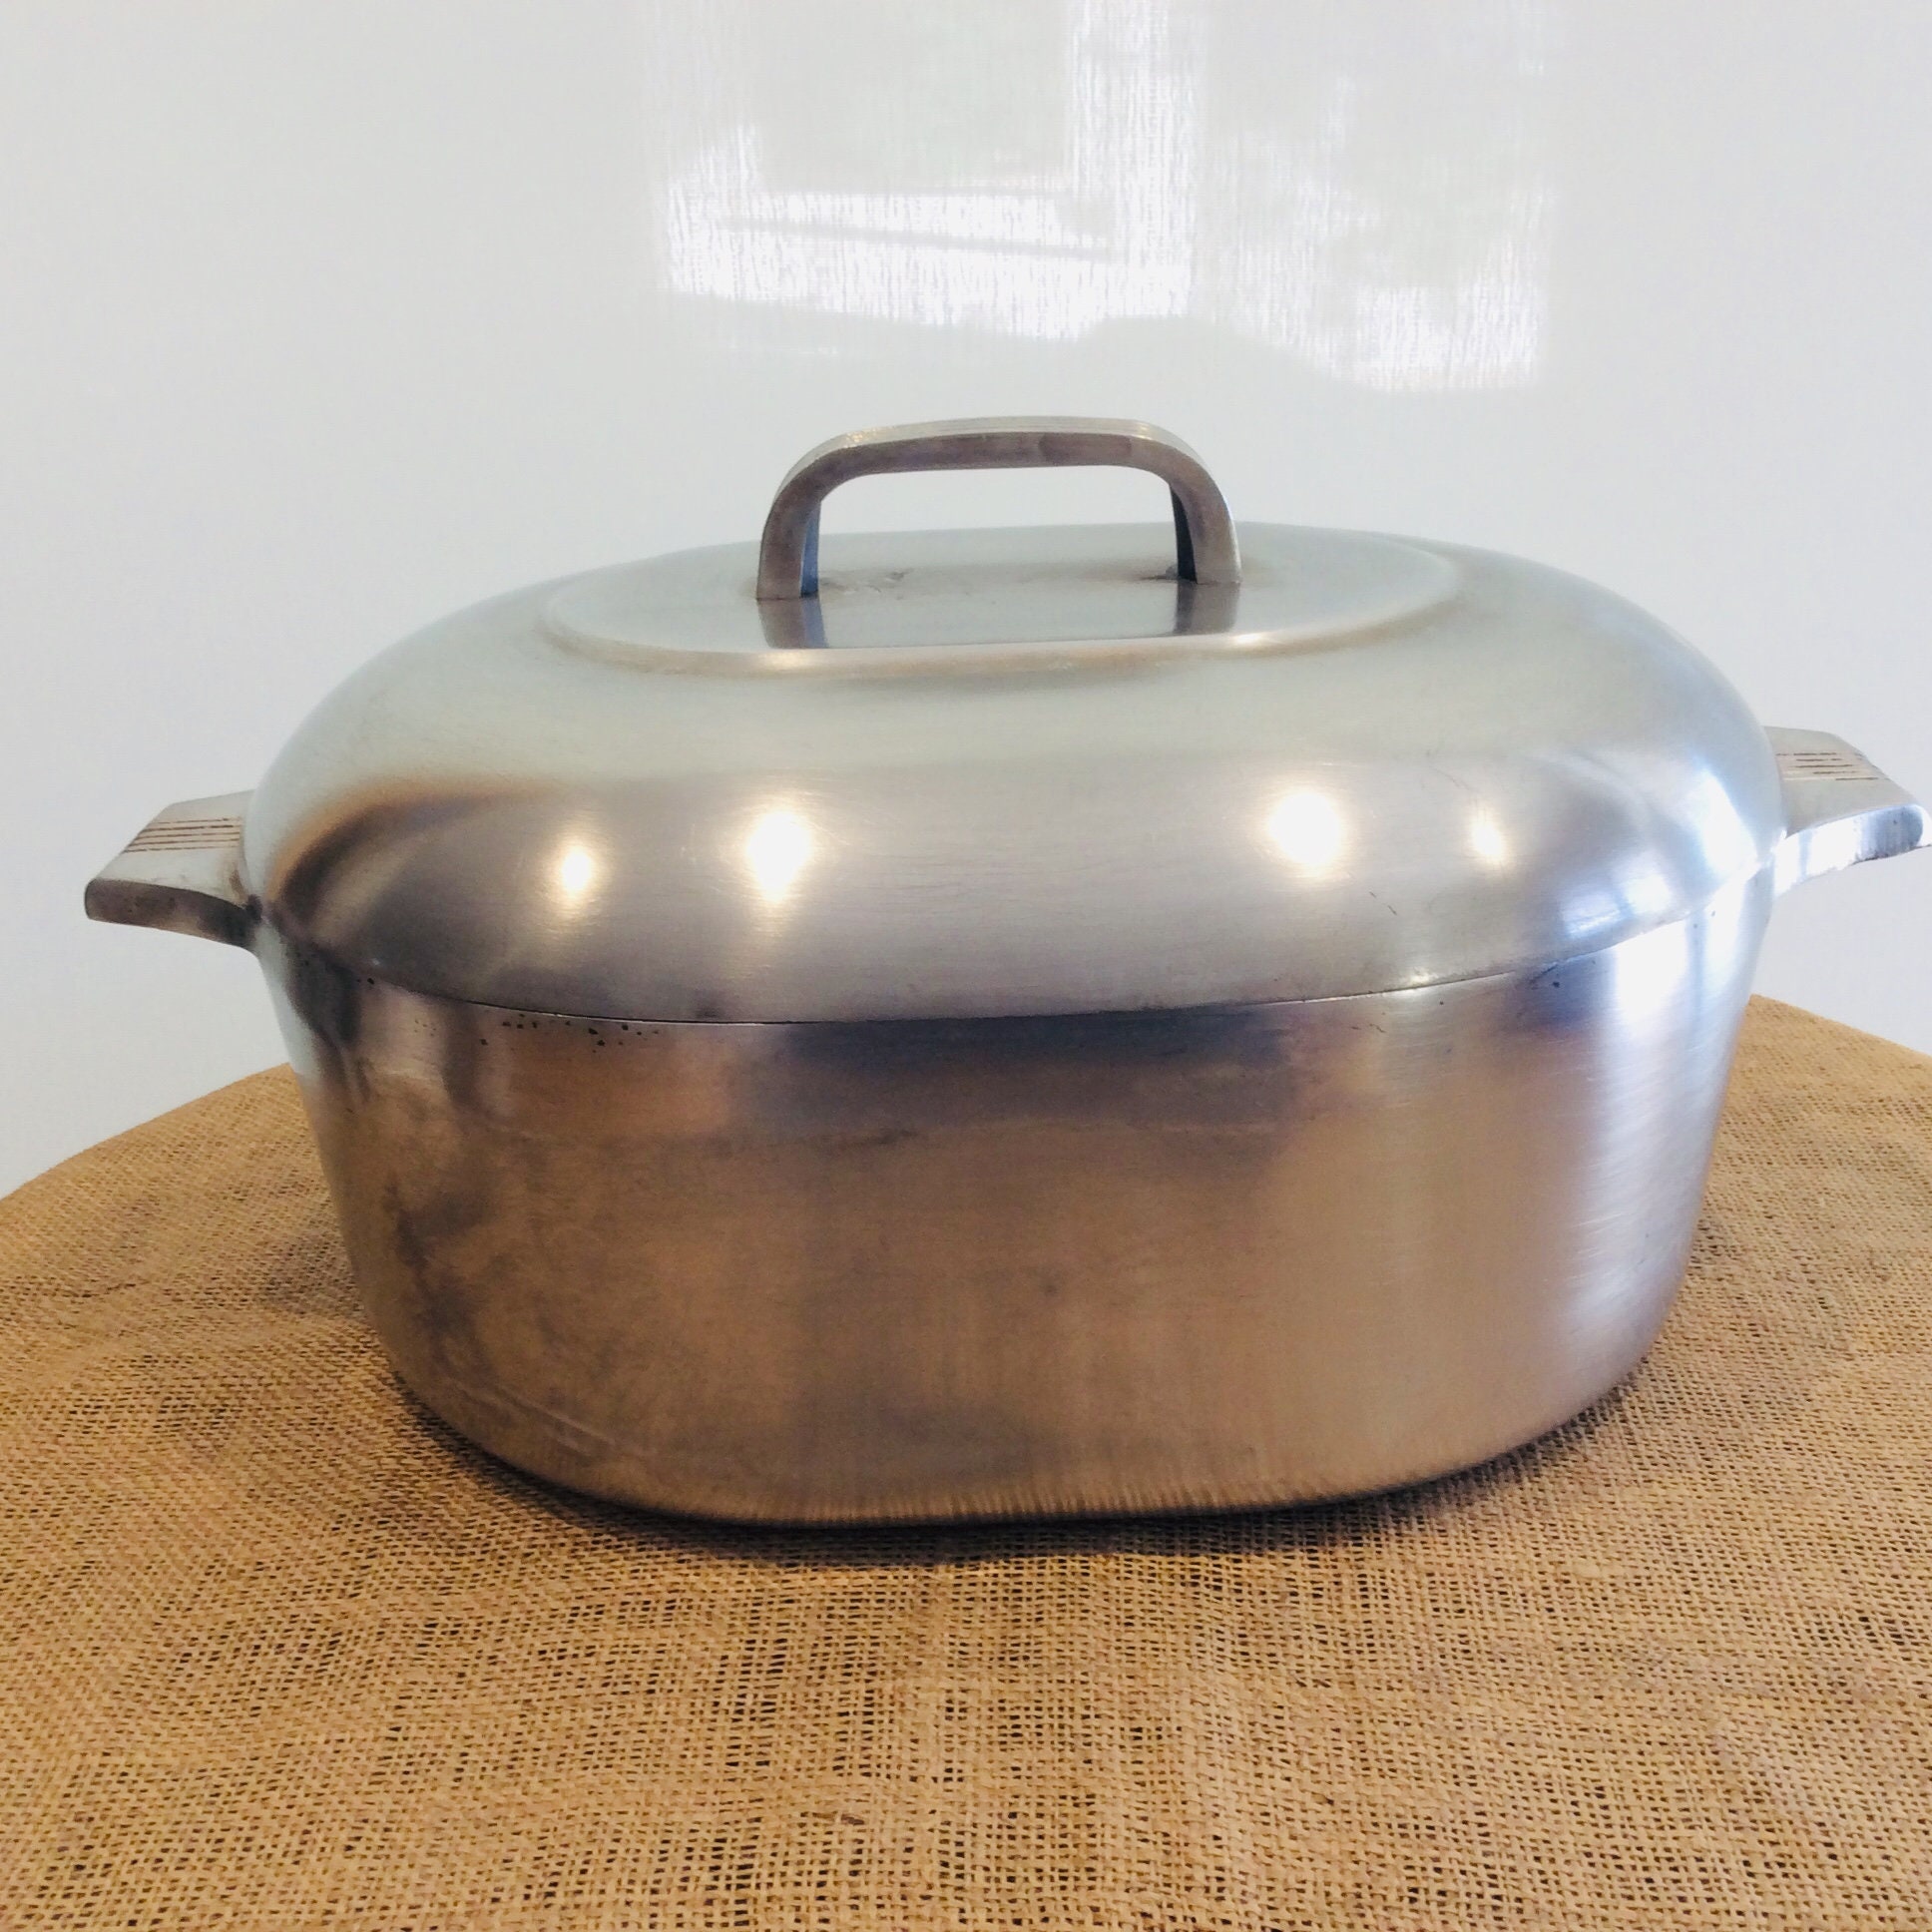 Magnalite Dutch Oven Roaster - household items - by owner